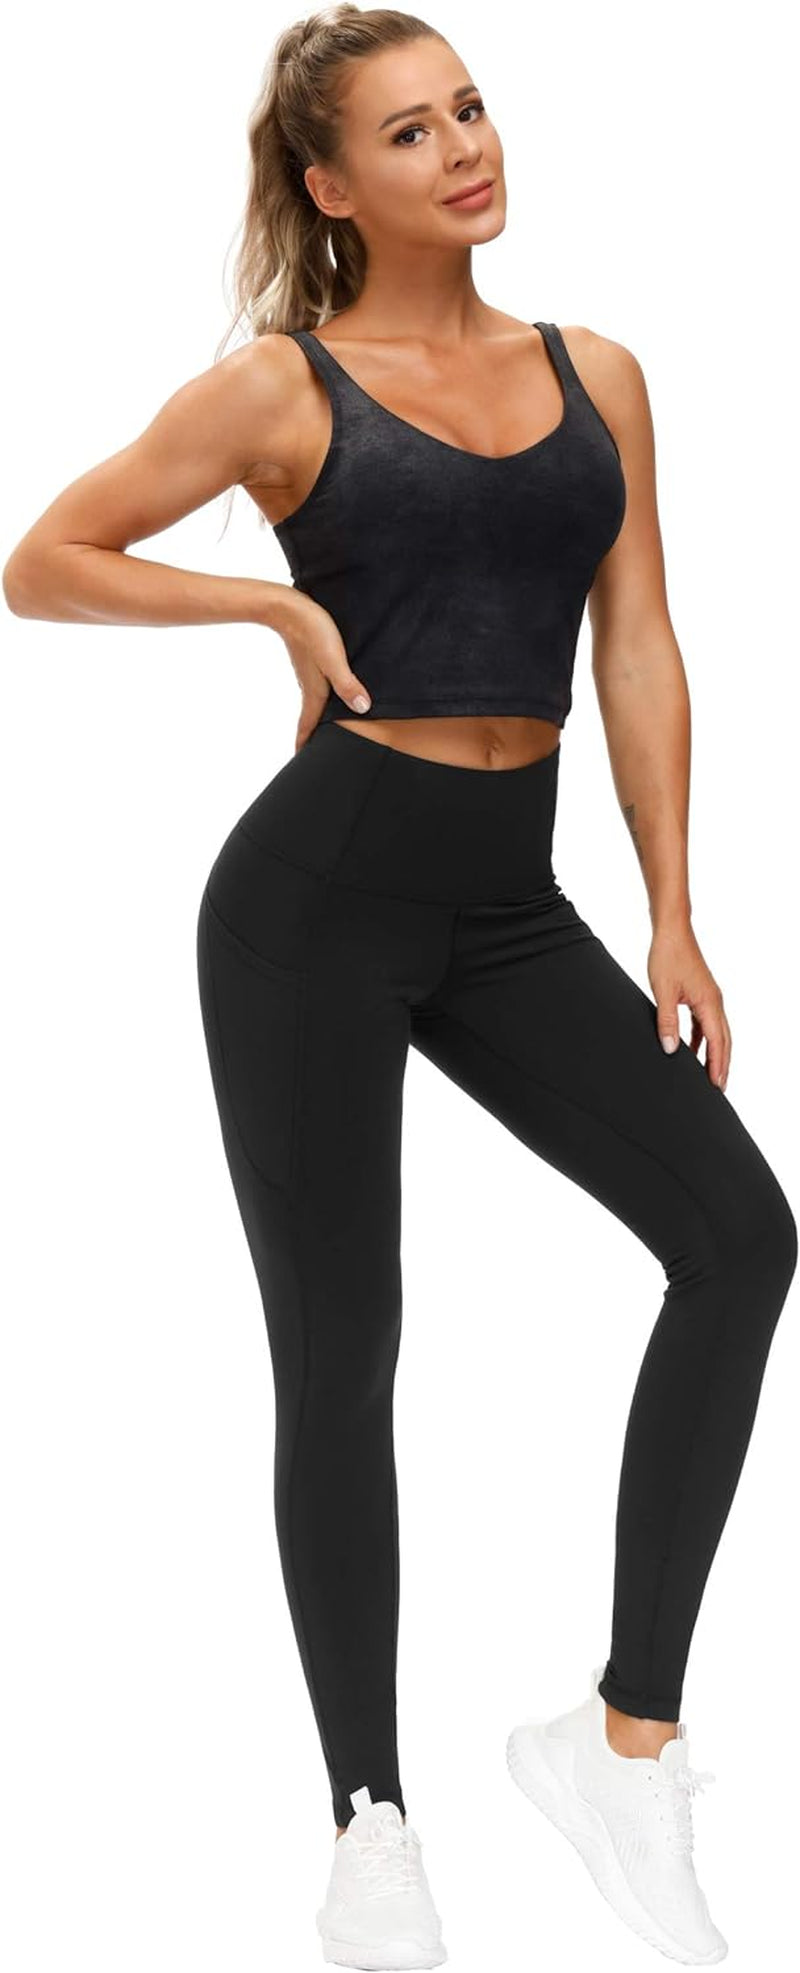 The Gym People Thick High Waist Yoga Pants with Pockets, Tummy Control Workout Running Yoga Leggings for Women